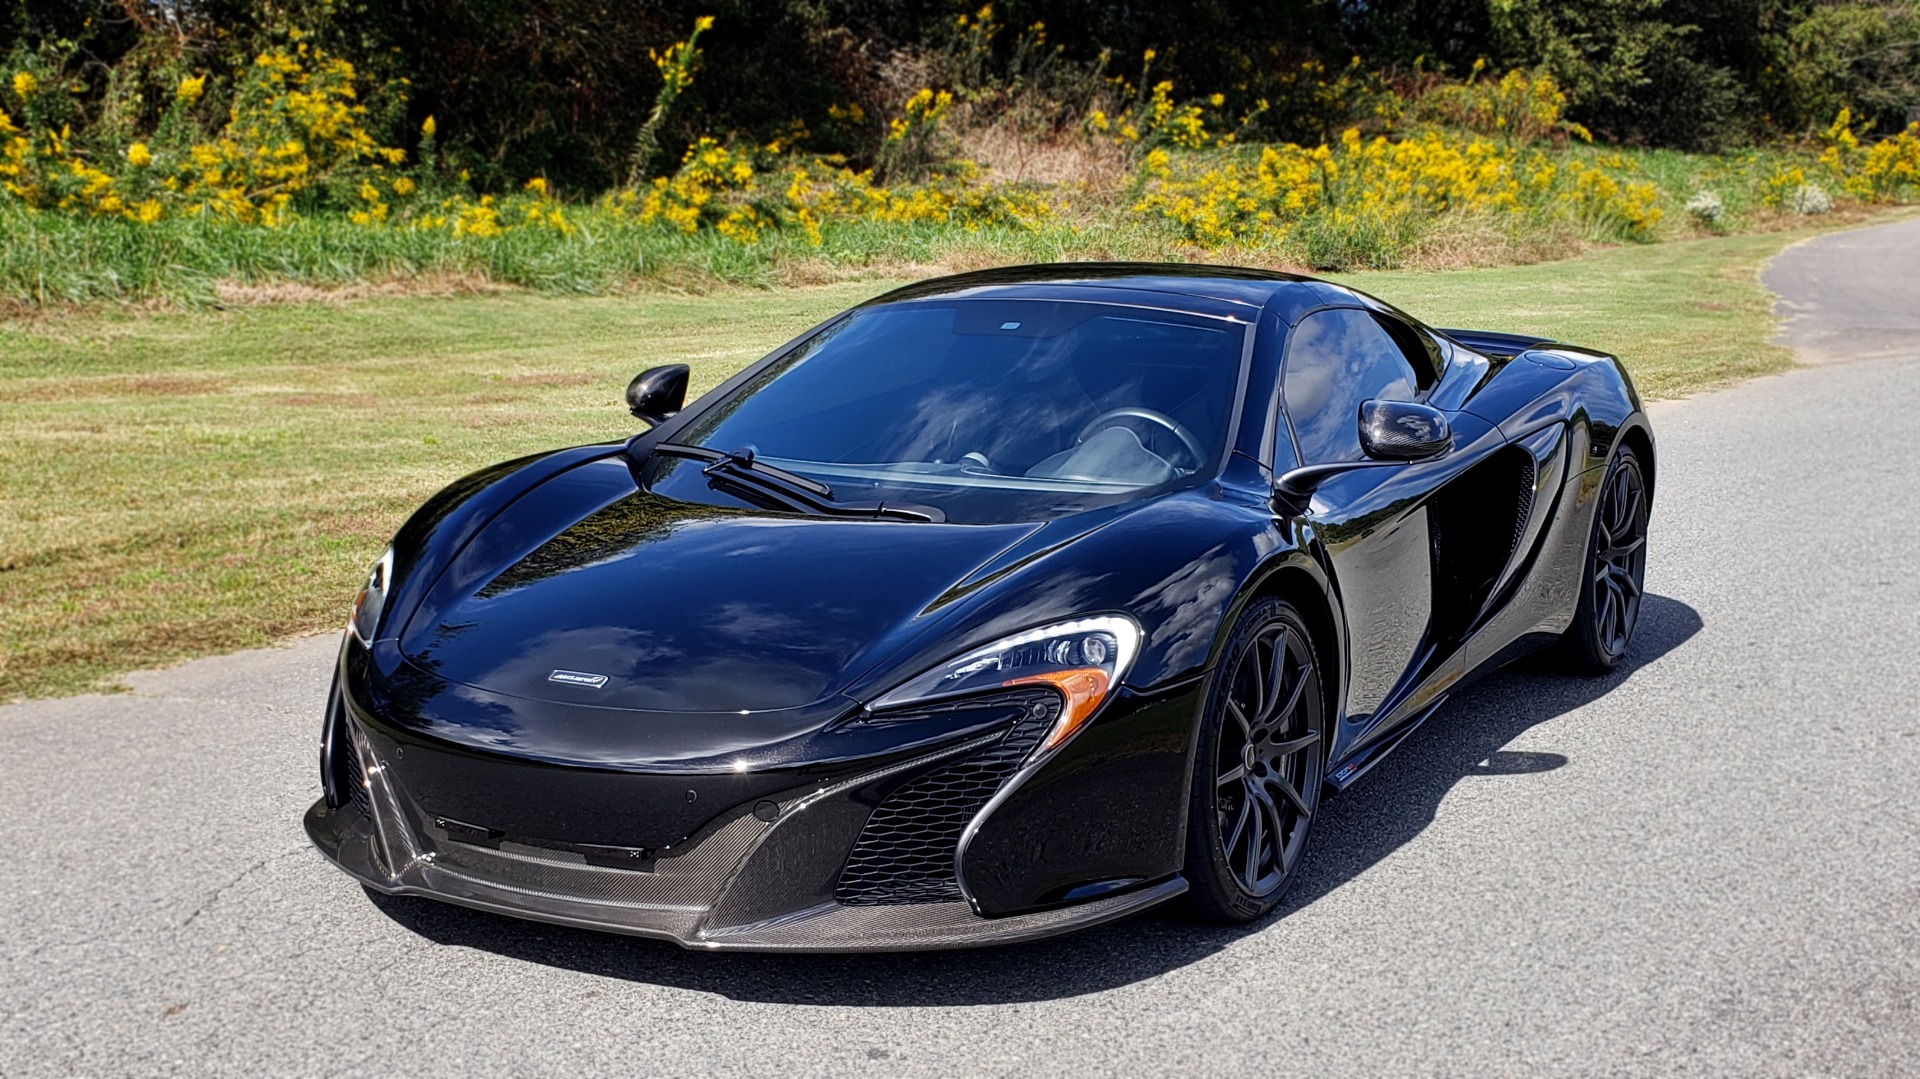 Used 2016 McLaren 650S SPIDER / 641HP / PARK SENSORS / LOW MILES / 1-OWNER for sale Sold at Formula Imports in Charlotte NC 28227 19